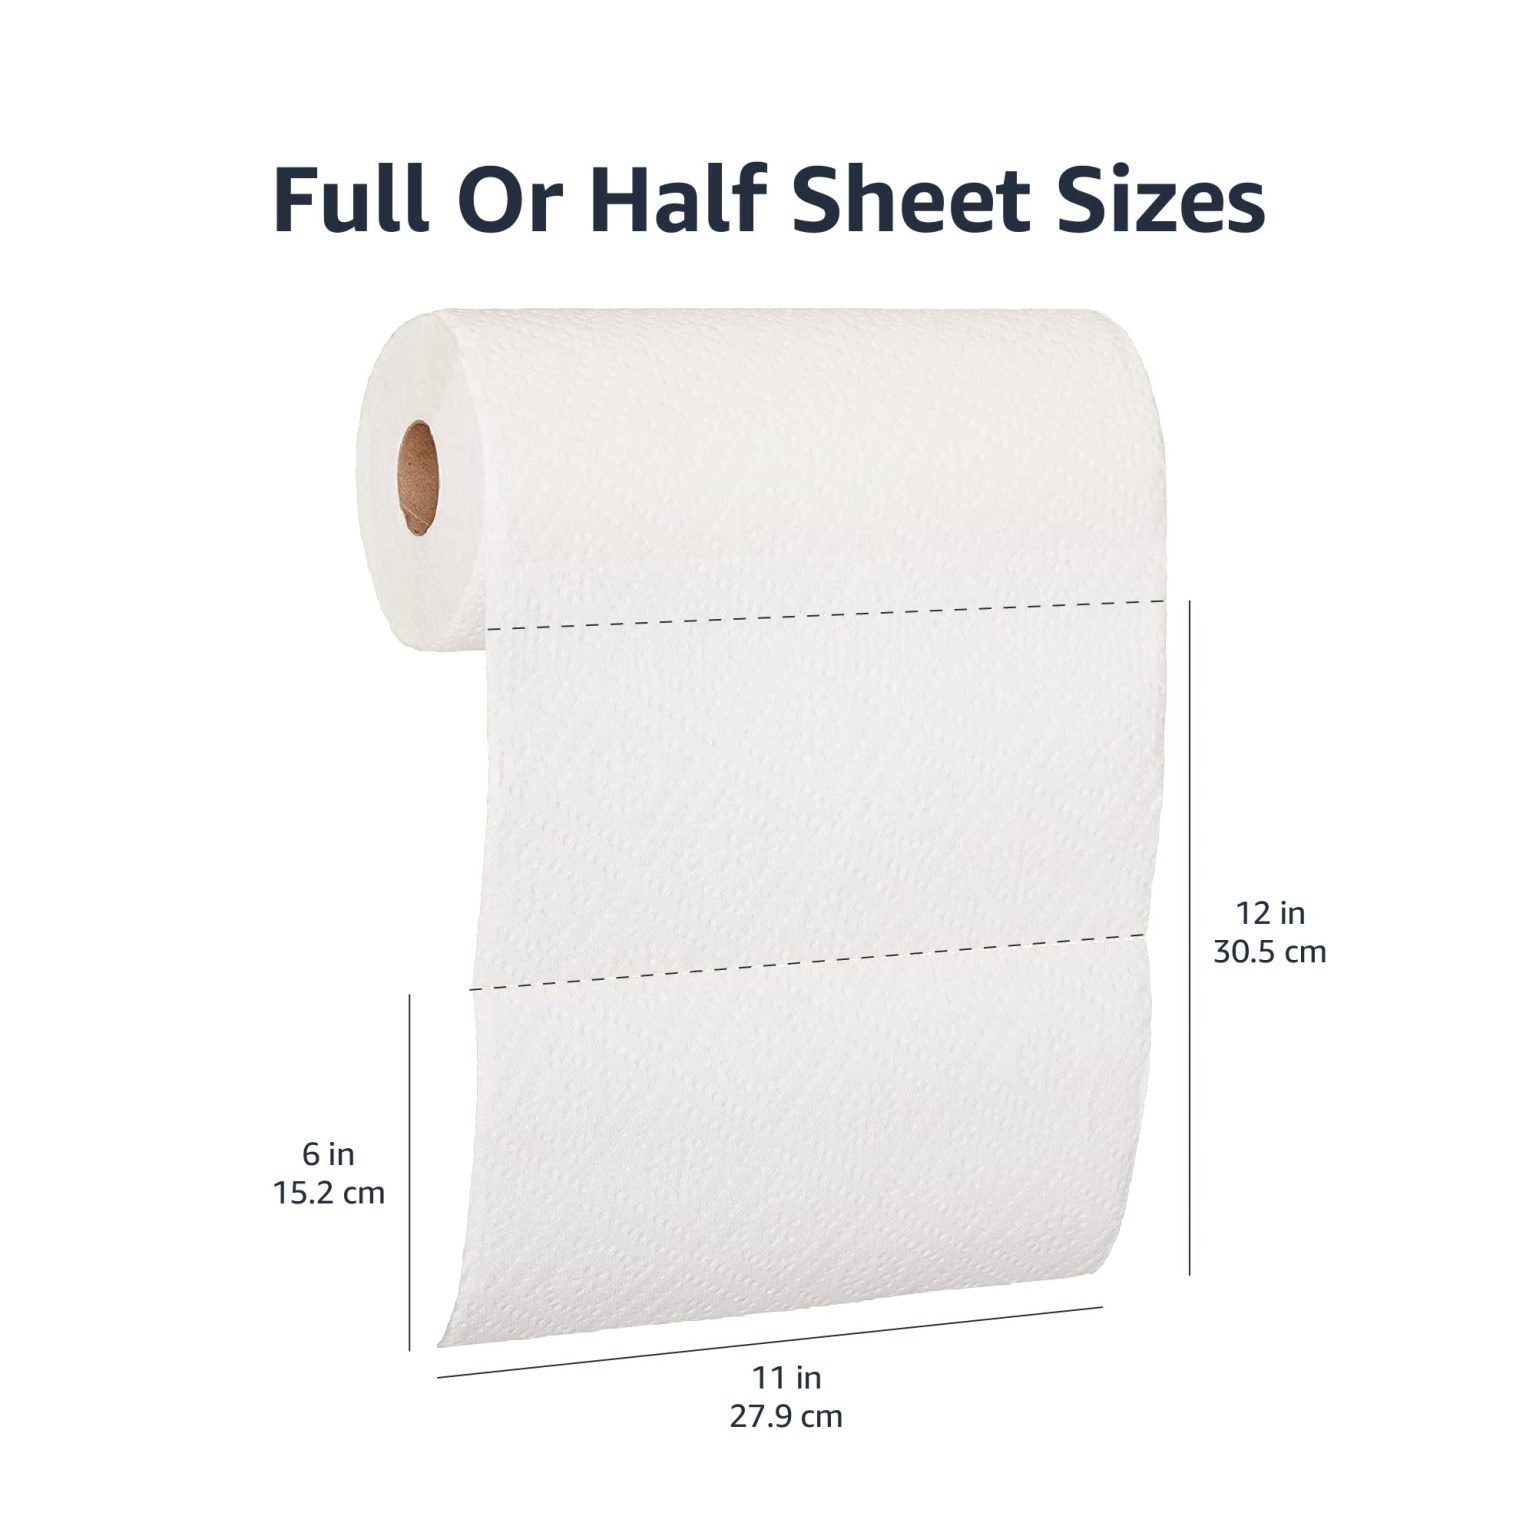  Half Sheet Size Paper A Comprehensive Guide Catdi Printing